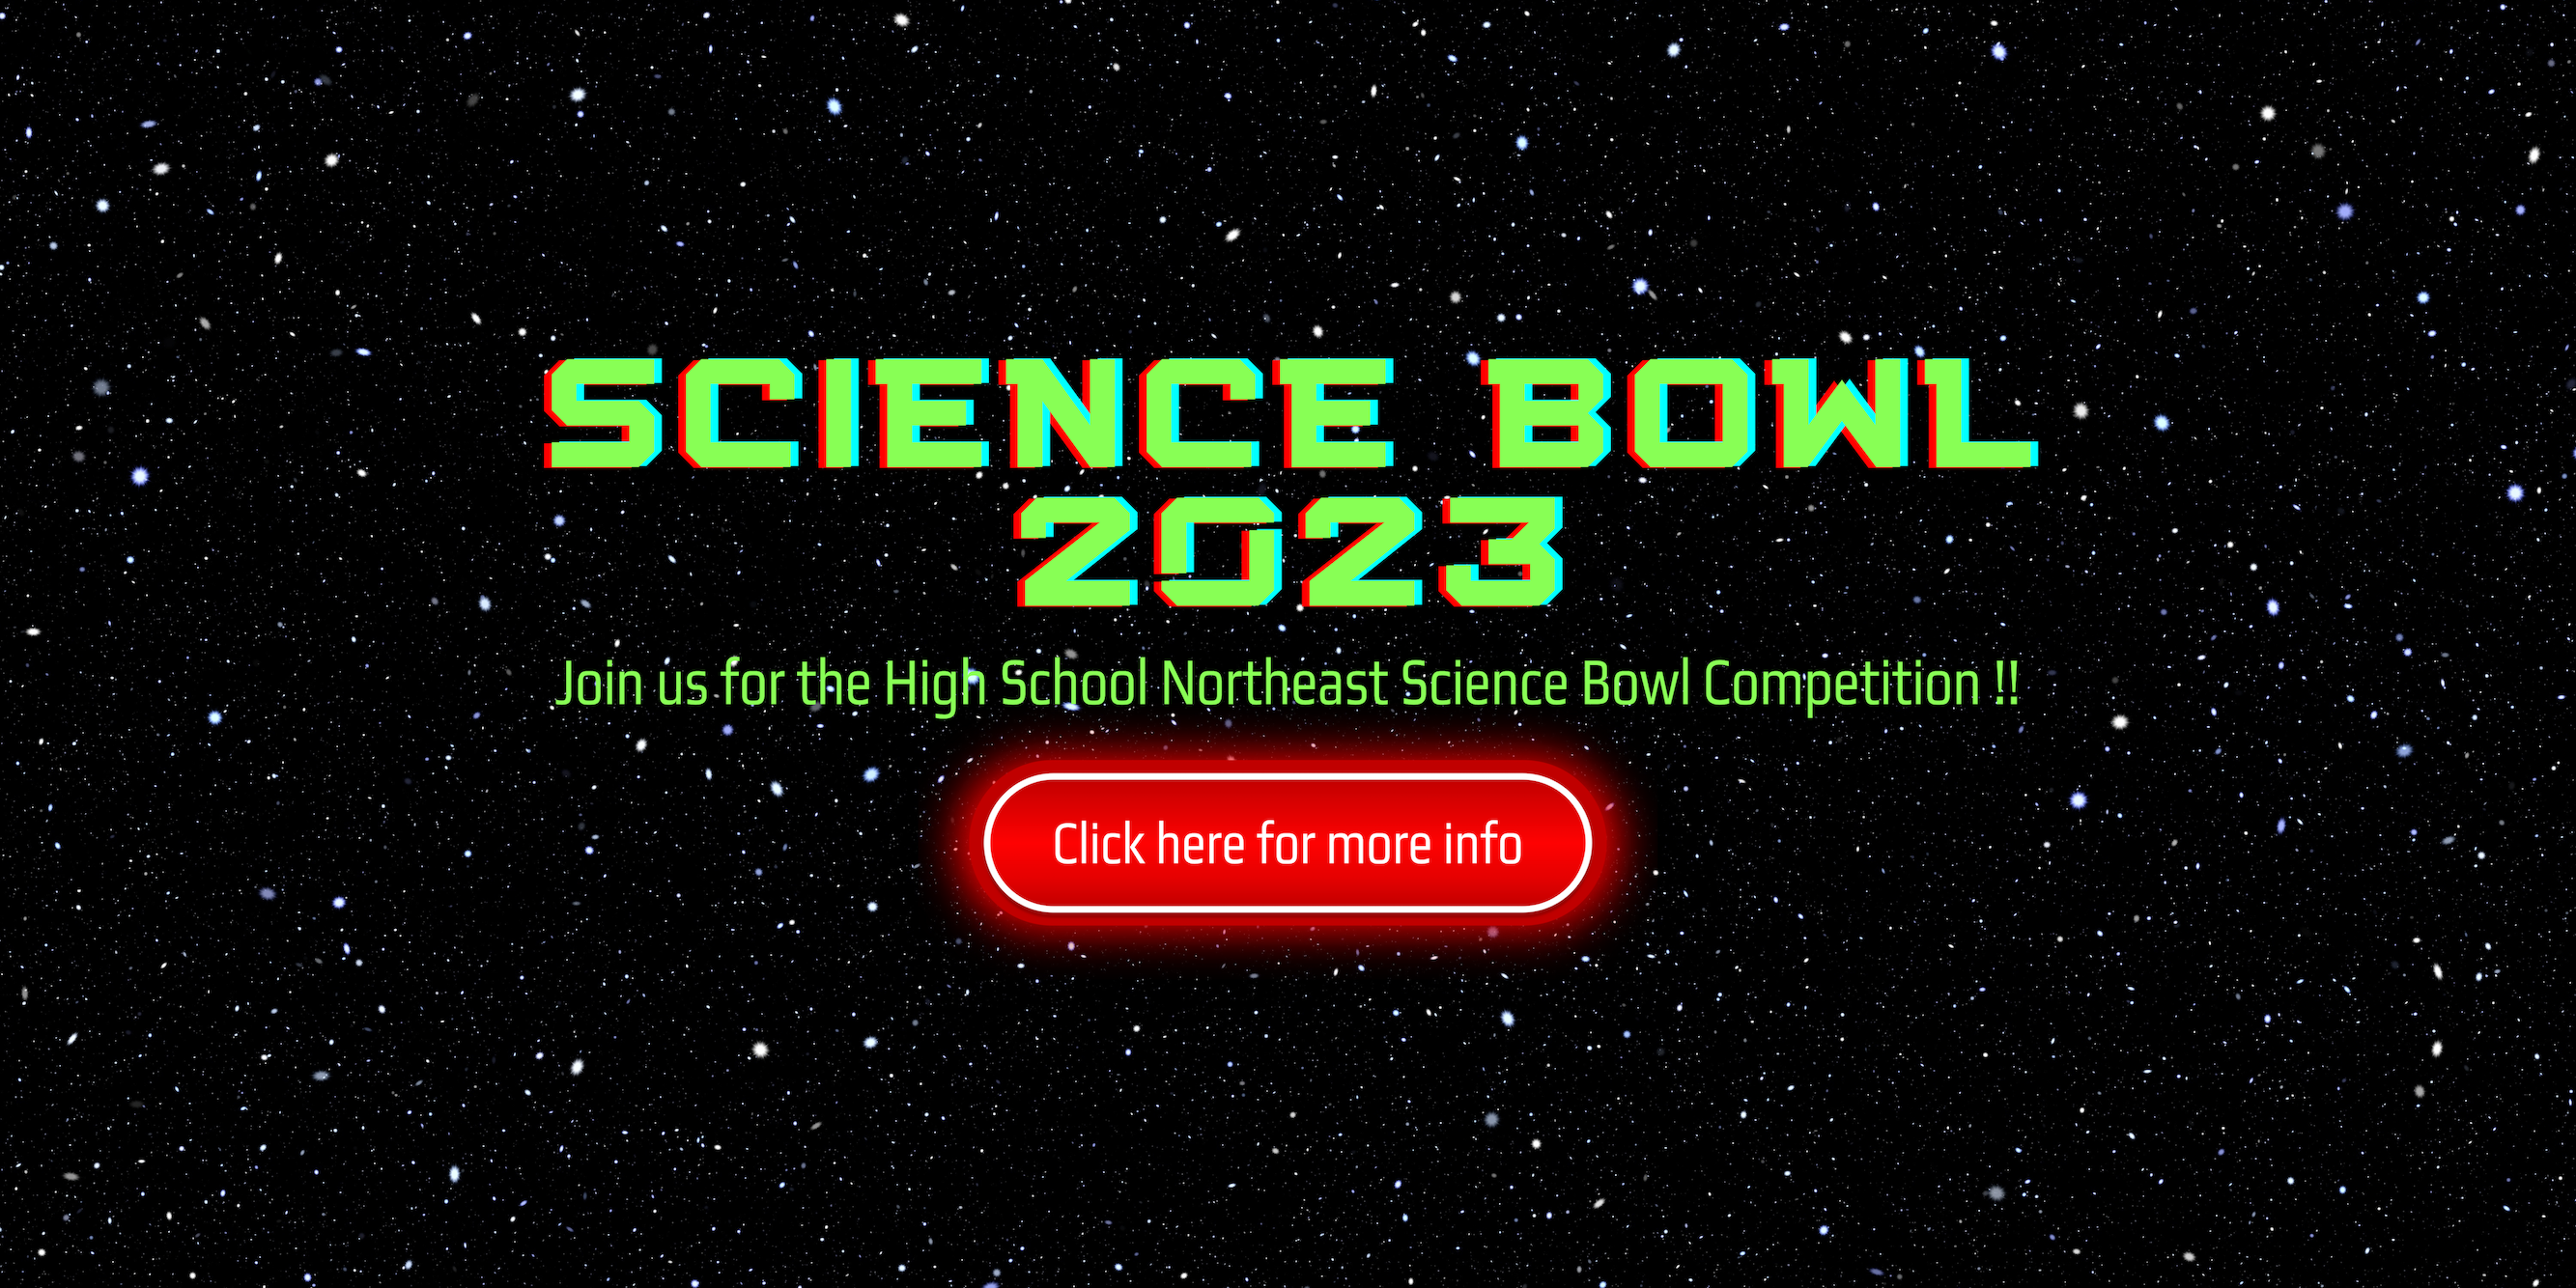 Science Bowl 2023. Join us for the High School Northeast Science Bowl Competition! Click here for more information.